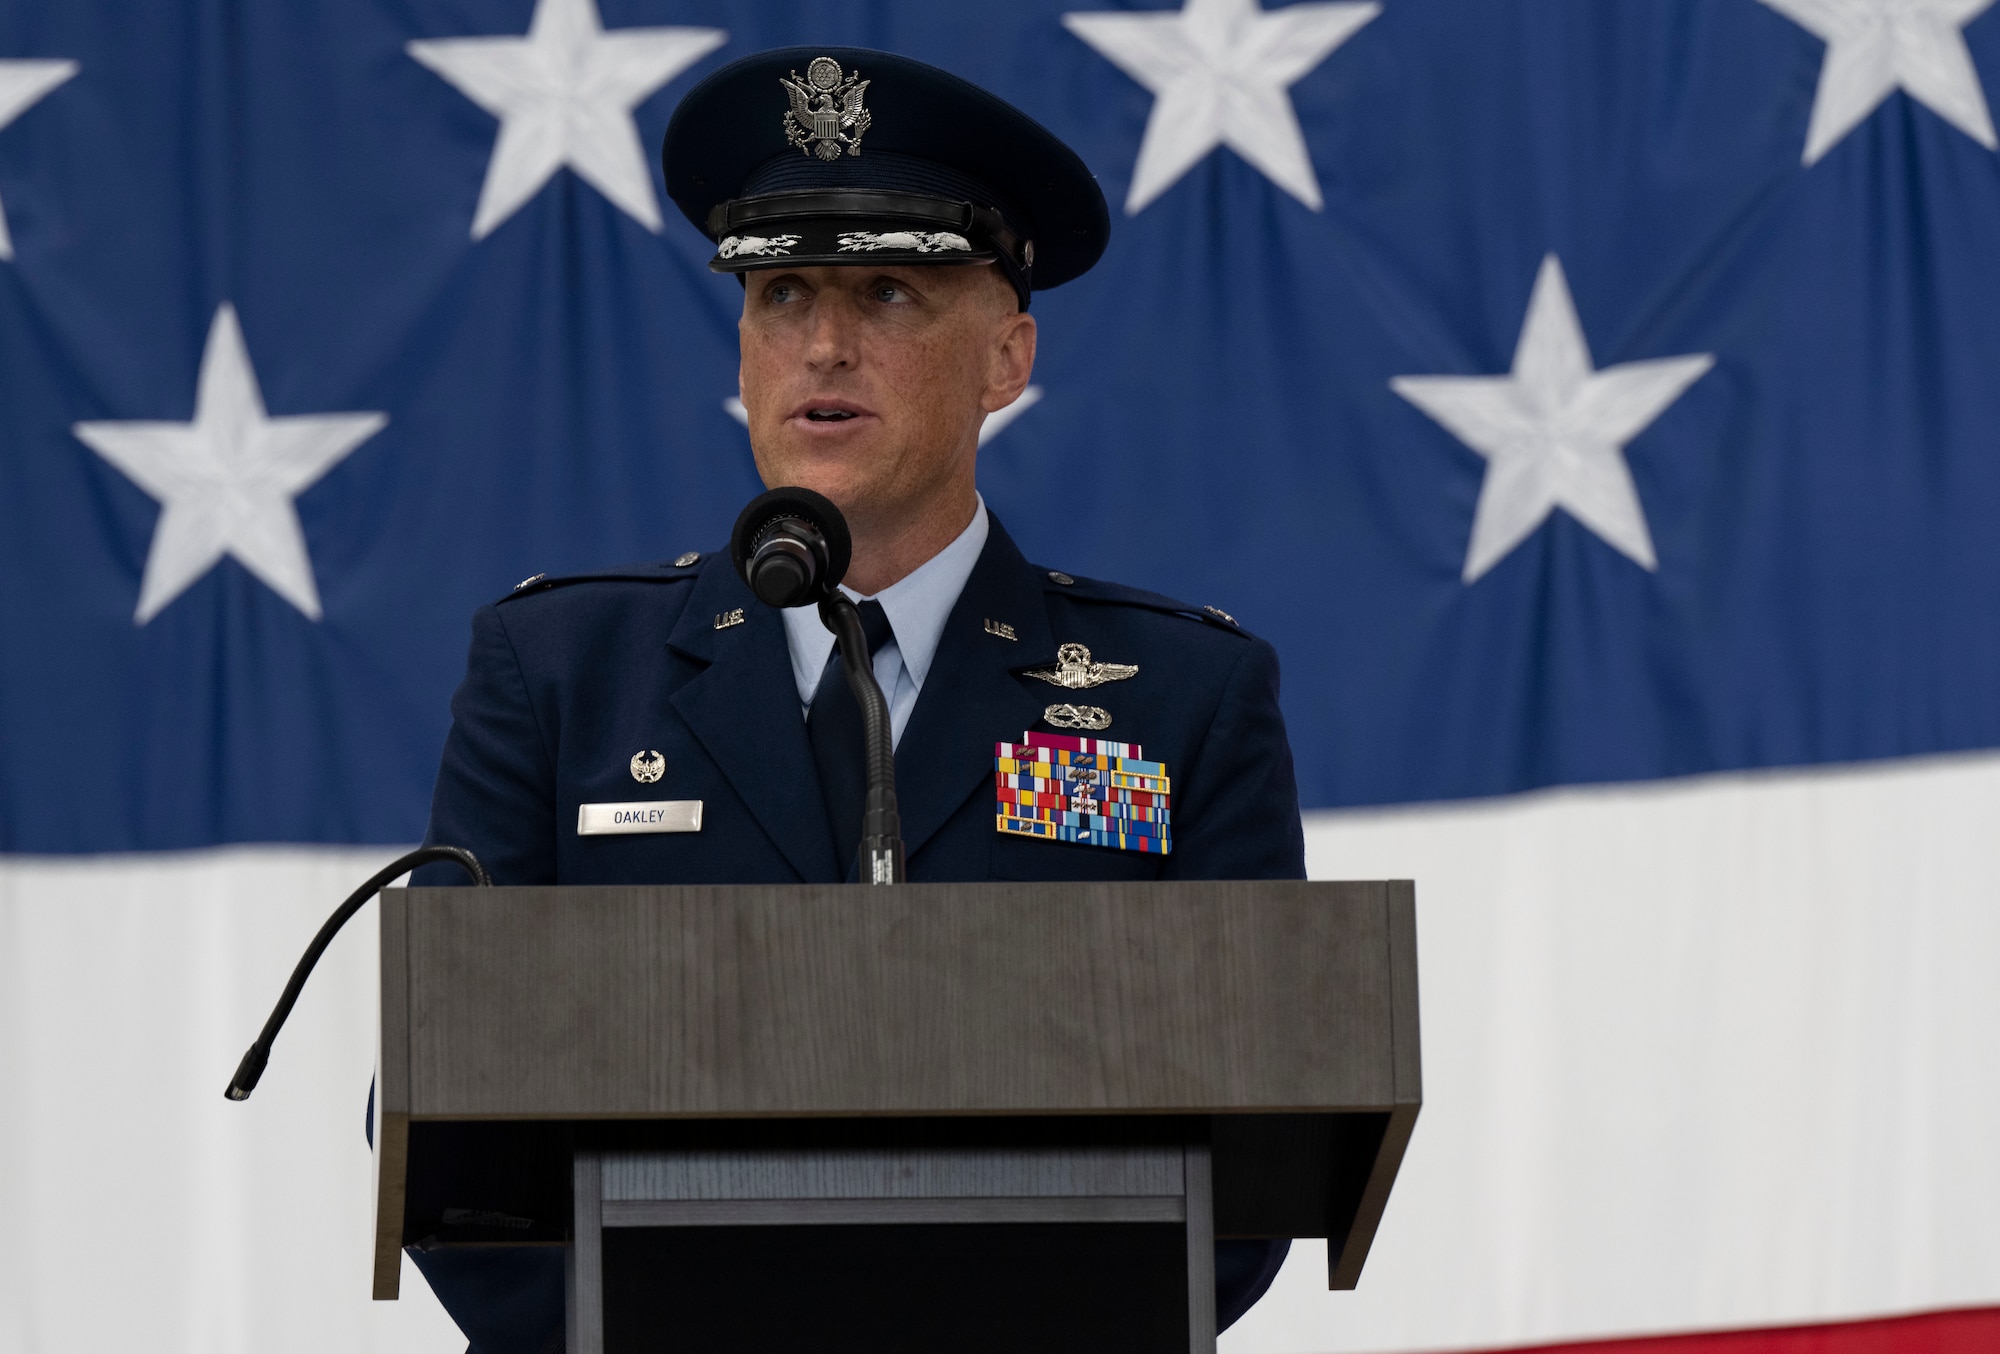 U.S. Air Force Col. Derek C. Oakley, incoming 28th Bomb Wing commander, gives a speech during a change of command ceremony at Ellsworth Air Force Base, South Dakota, June 23, 2023.